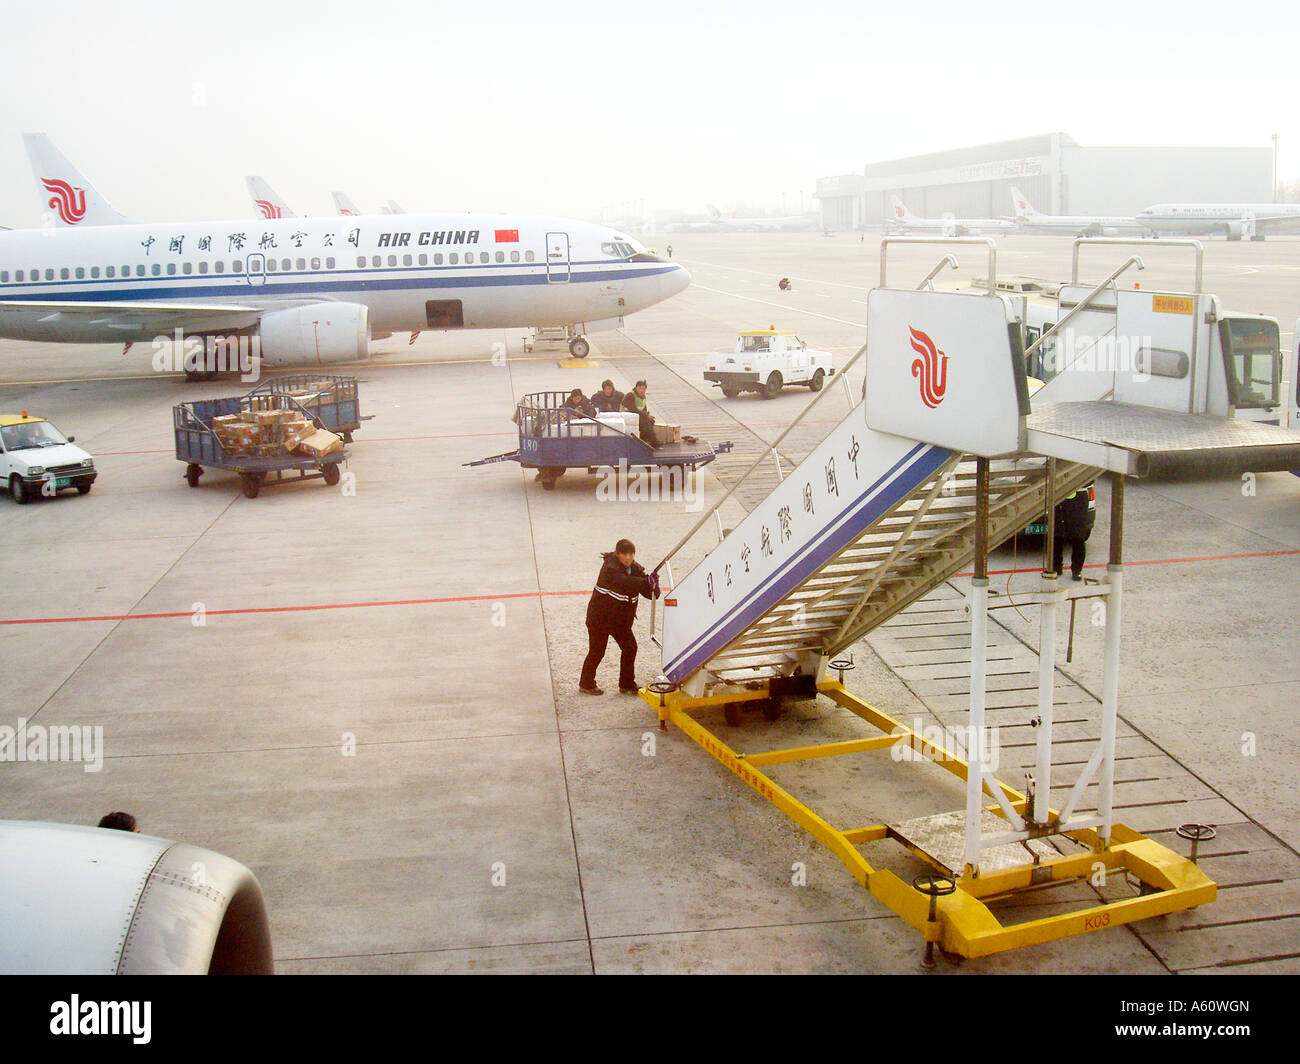 Beijing Airport China. Air China Chinese passenger jet plane aircraft on terminal apron. Man approaching with exit stairs Stock Photo